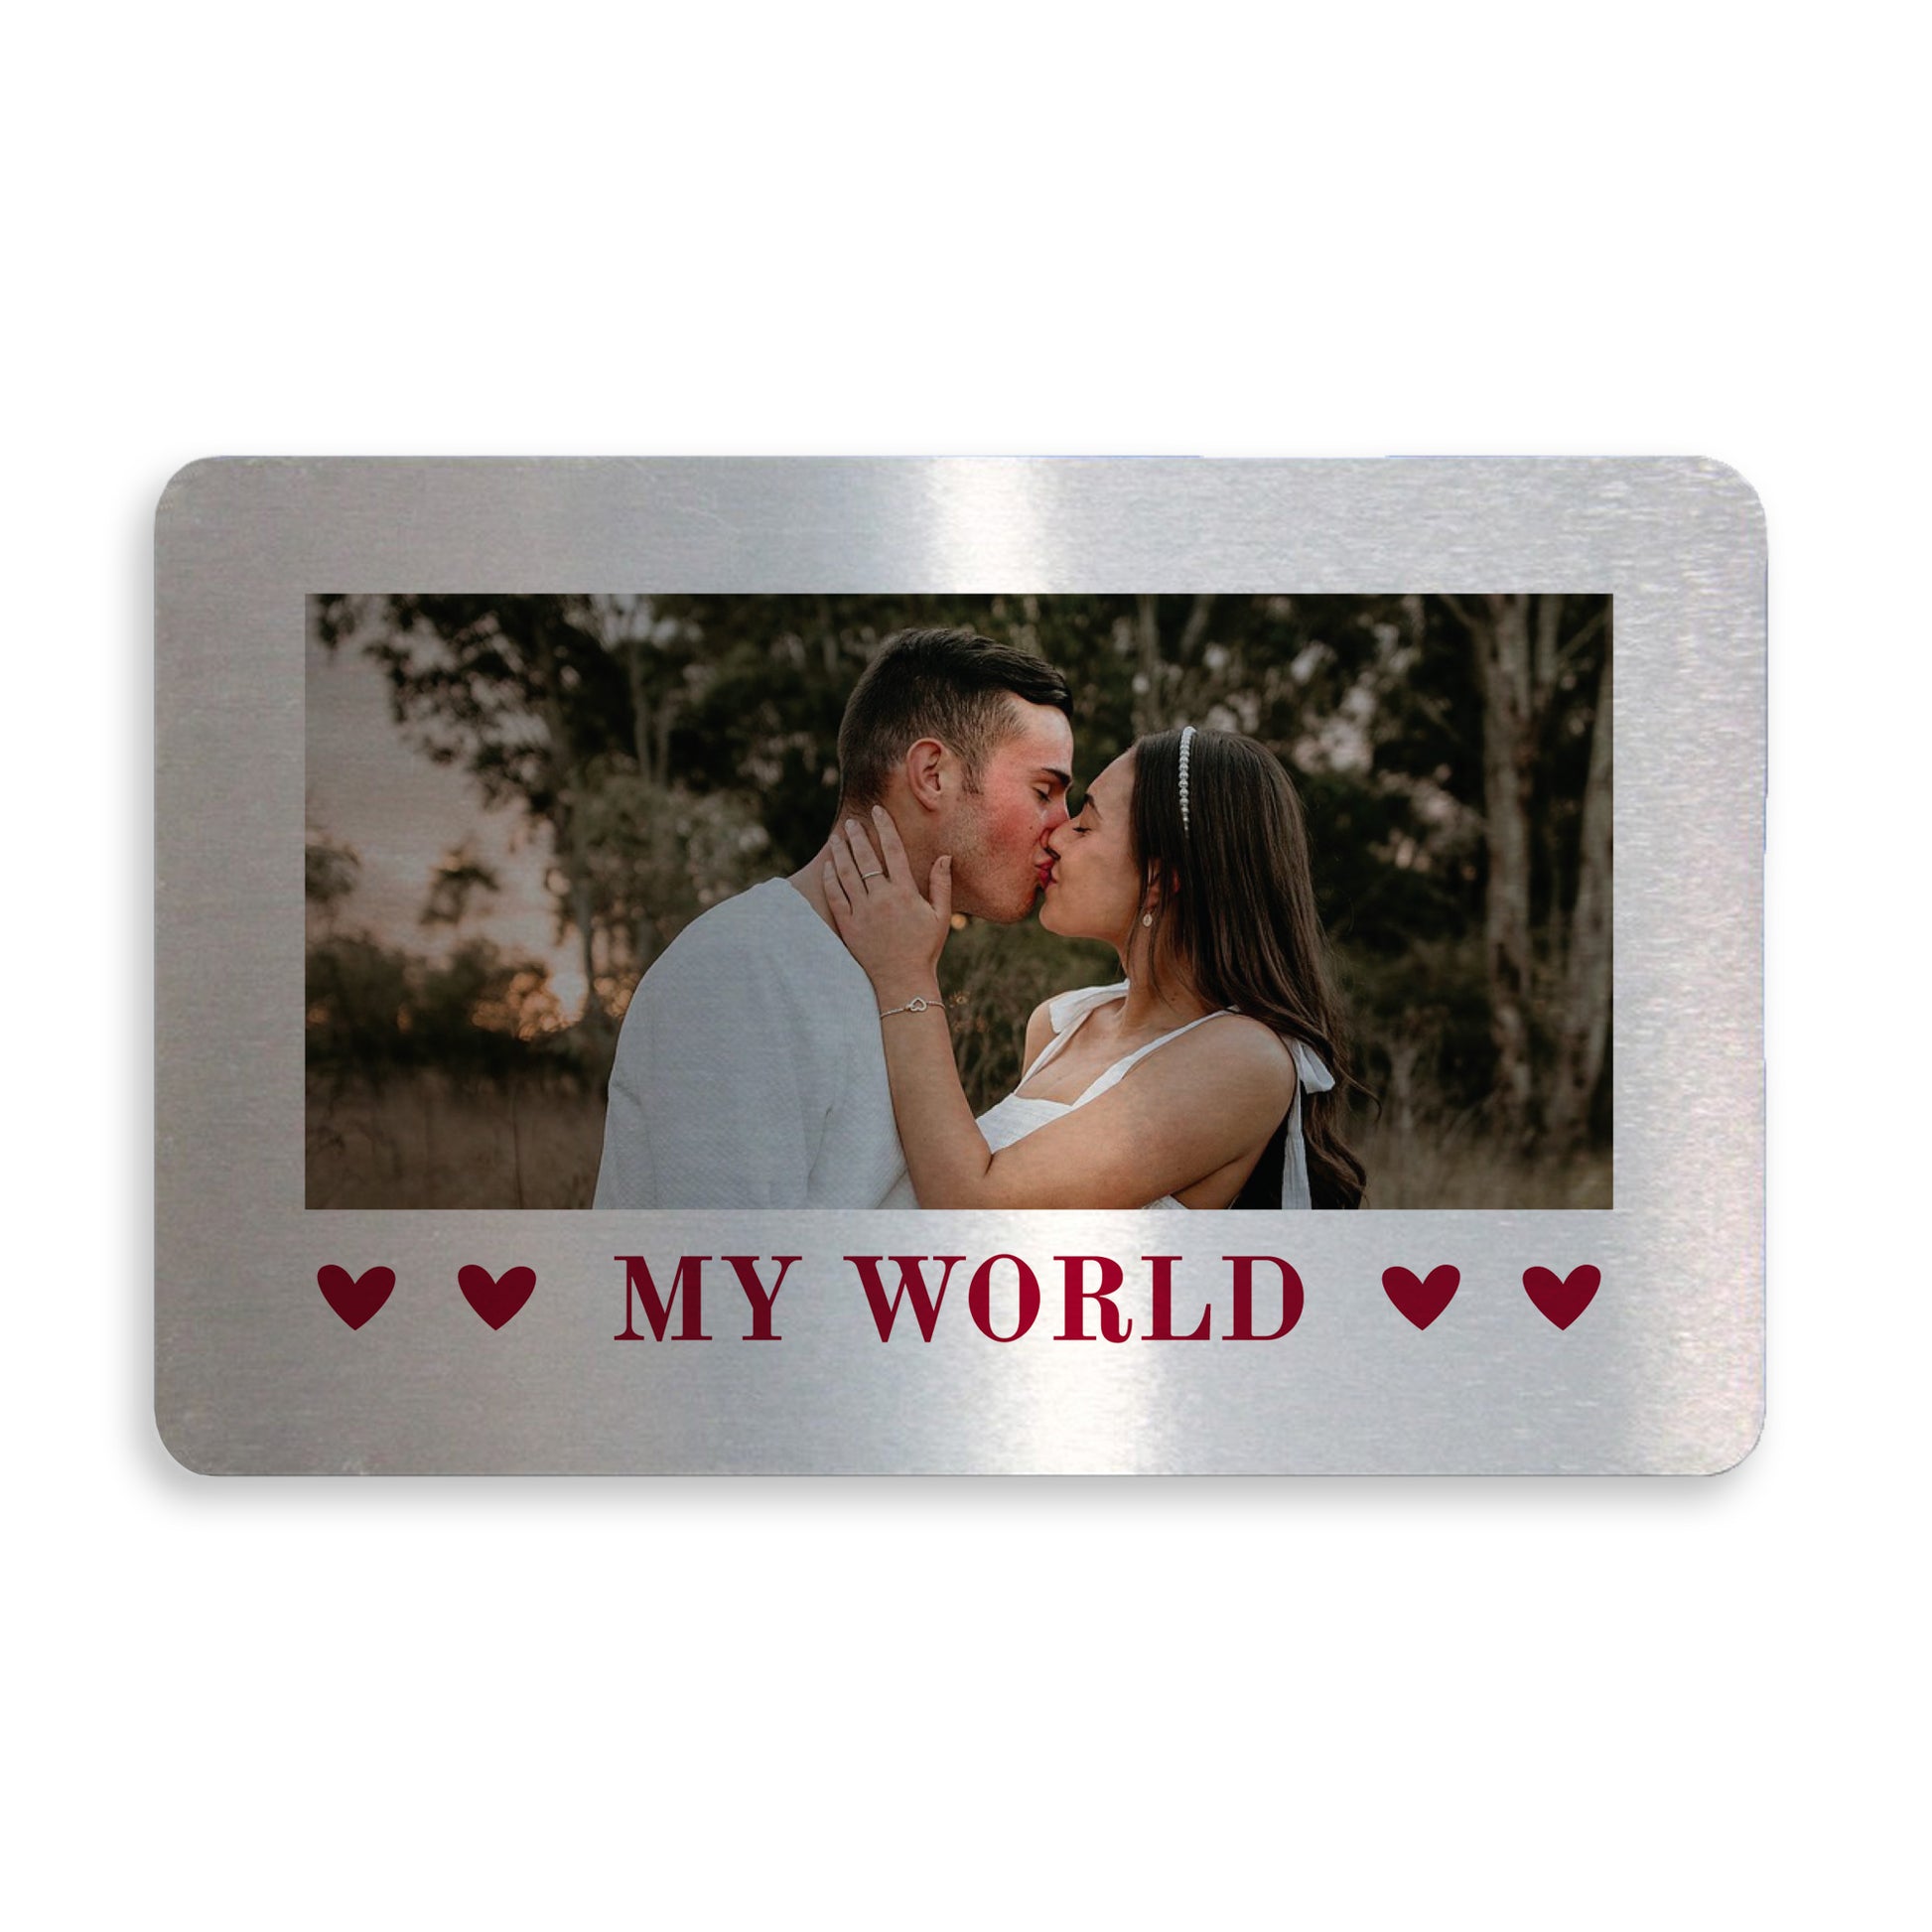 Personalised Gifts for Couples Boyfriend Girlfriend Husband Wife